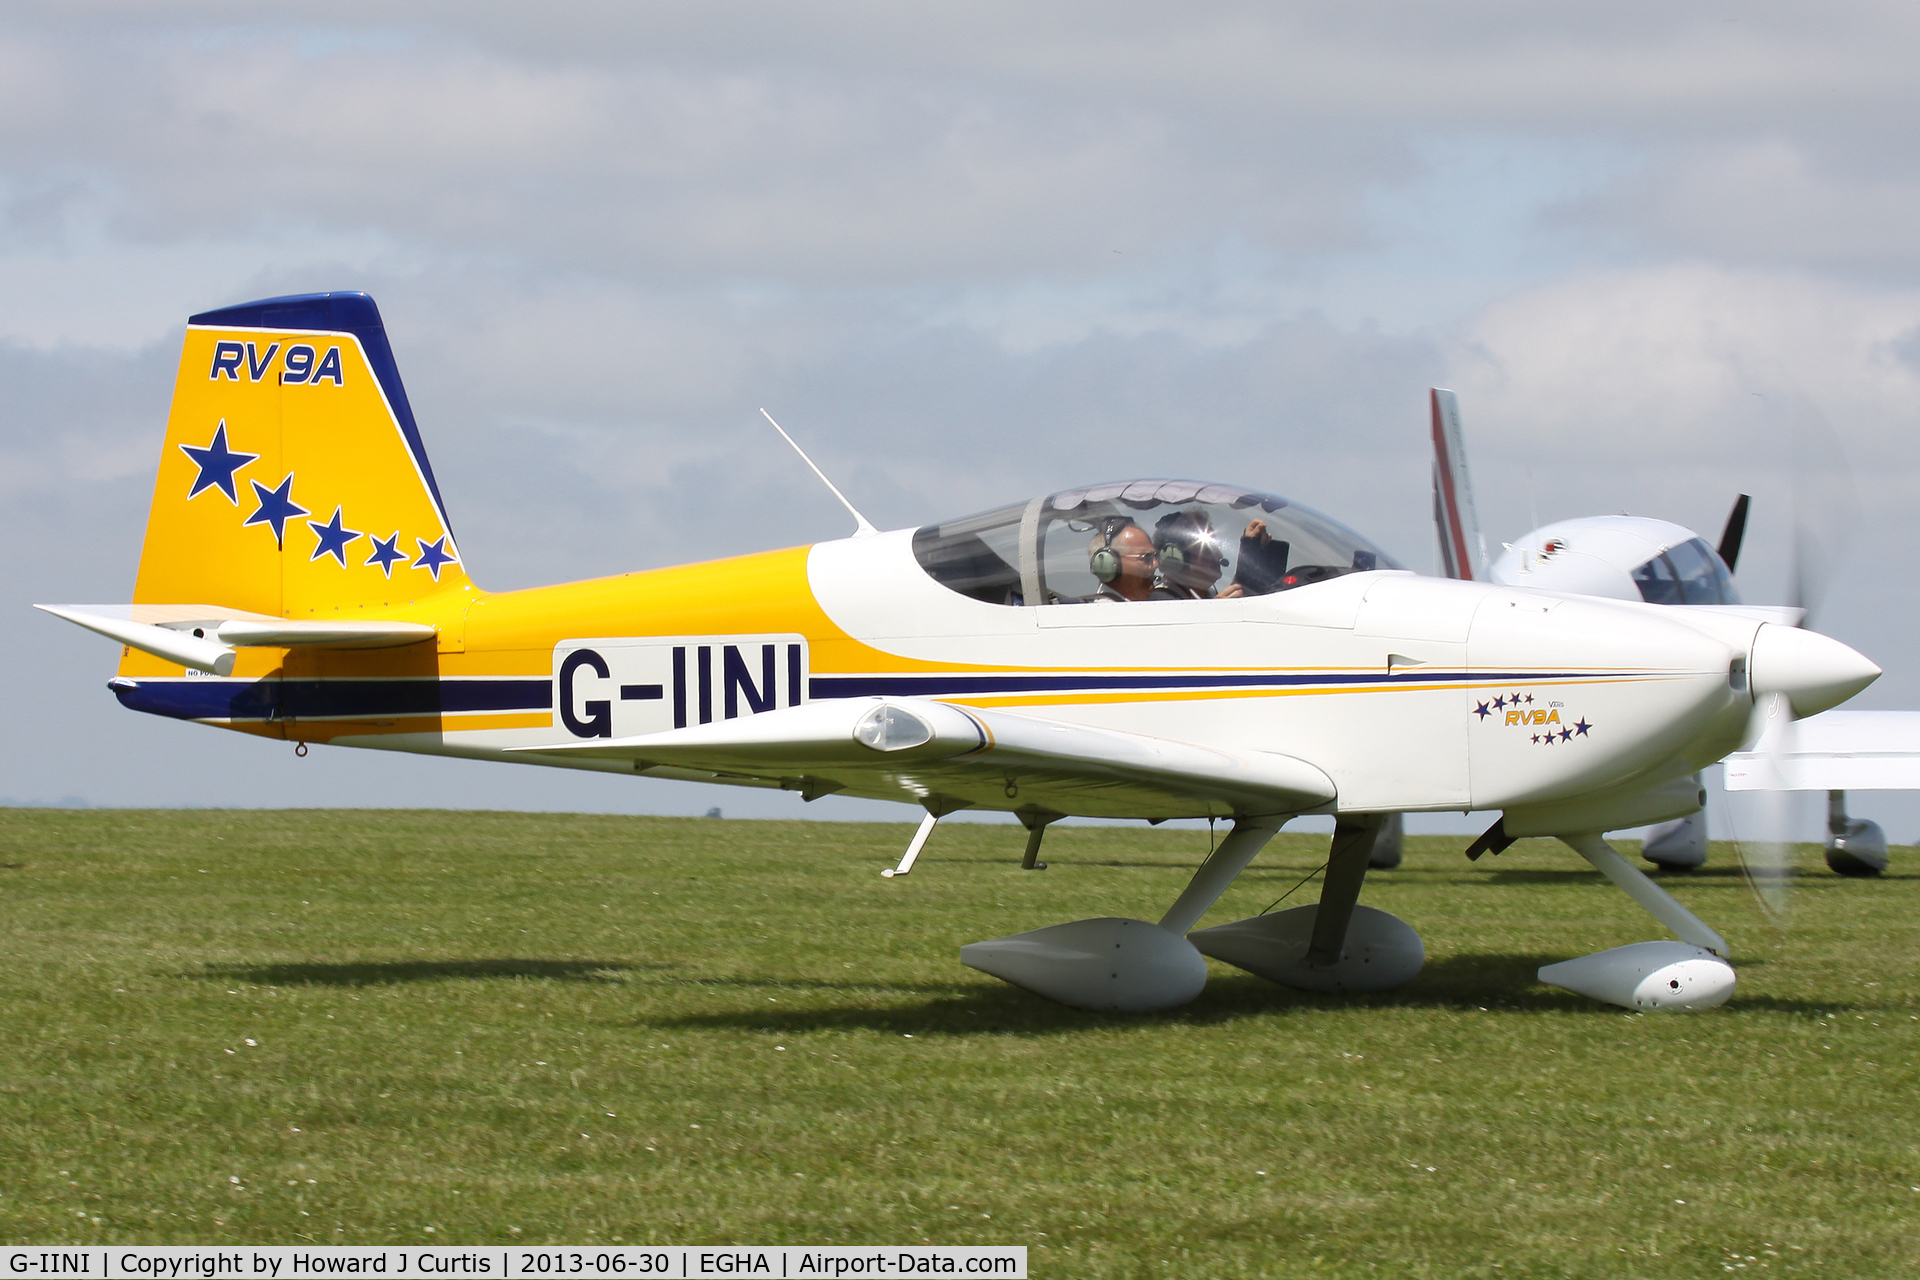 G-IINI, 2004 Vans RV-9A C/N PFA 320-13781, Privately owned, at the Pooley's Day Fly-In.